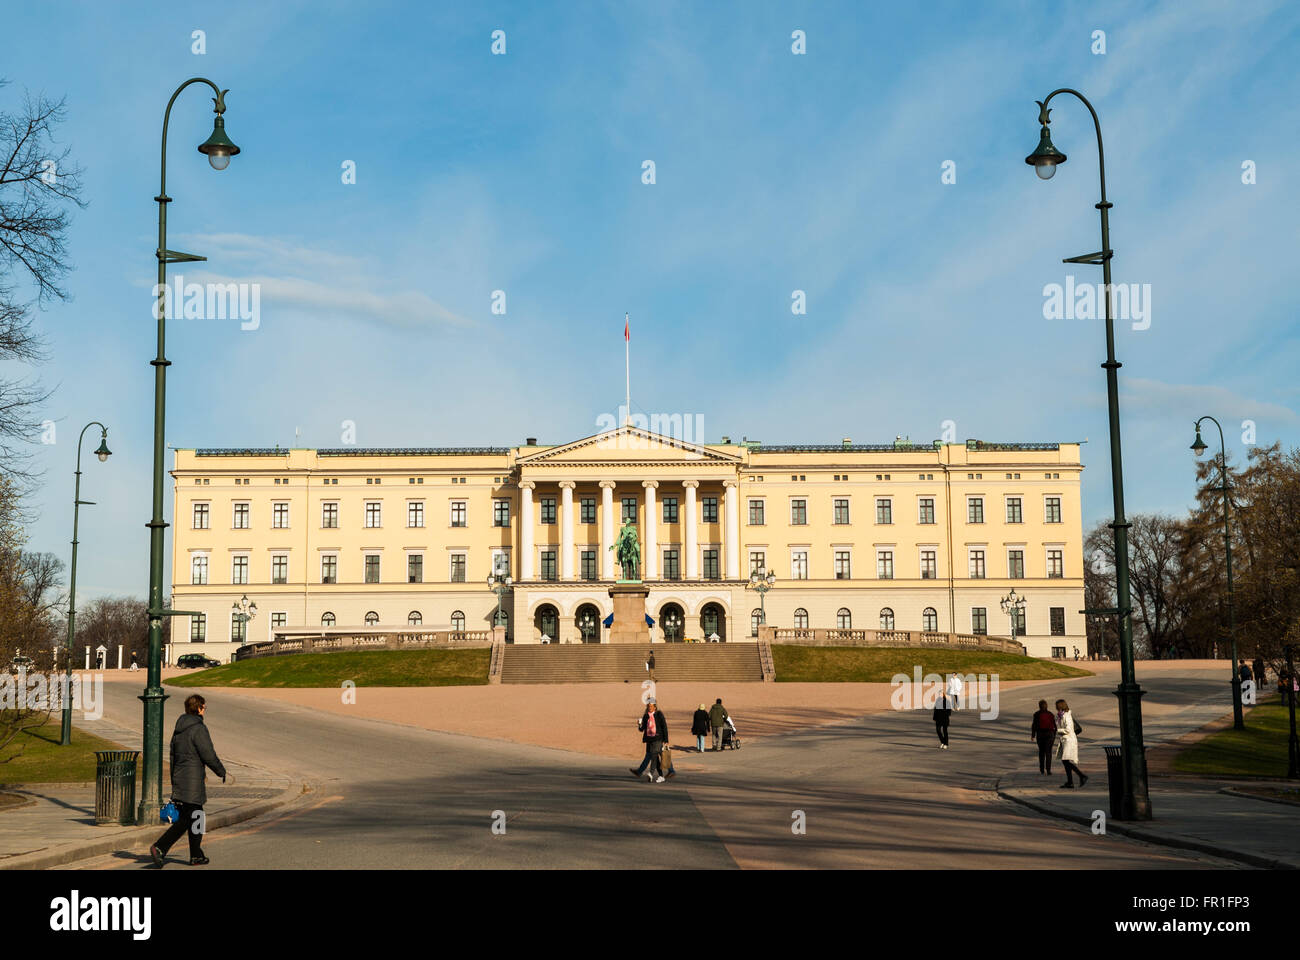 The Royal Palace Building Oslo Norway Stock Photo Alamy